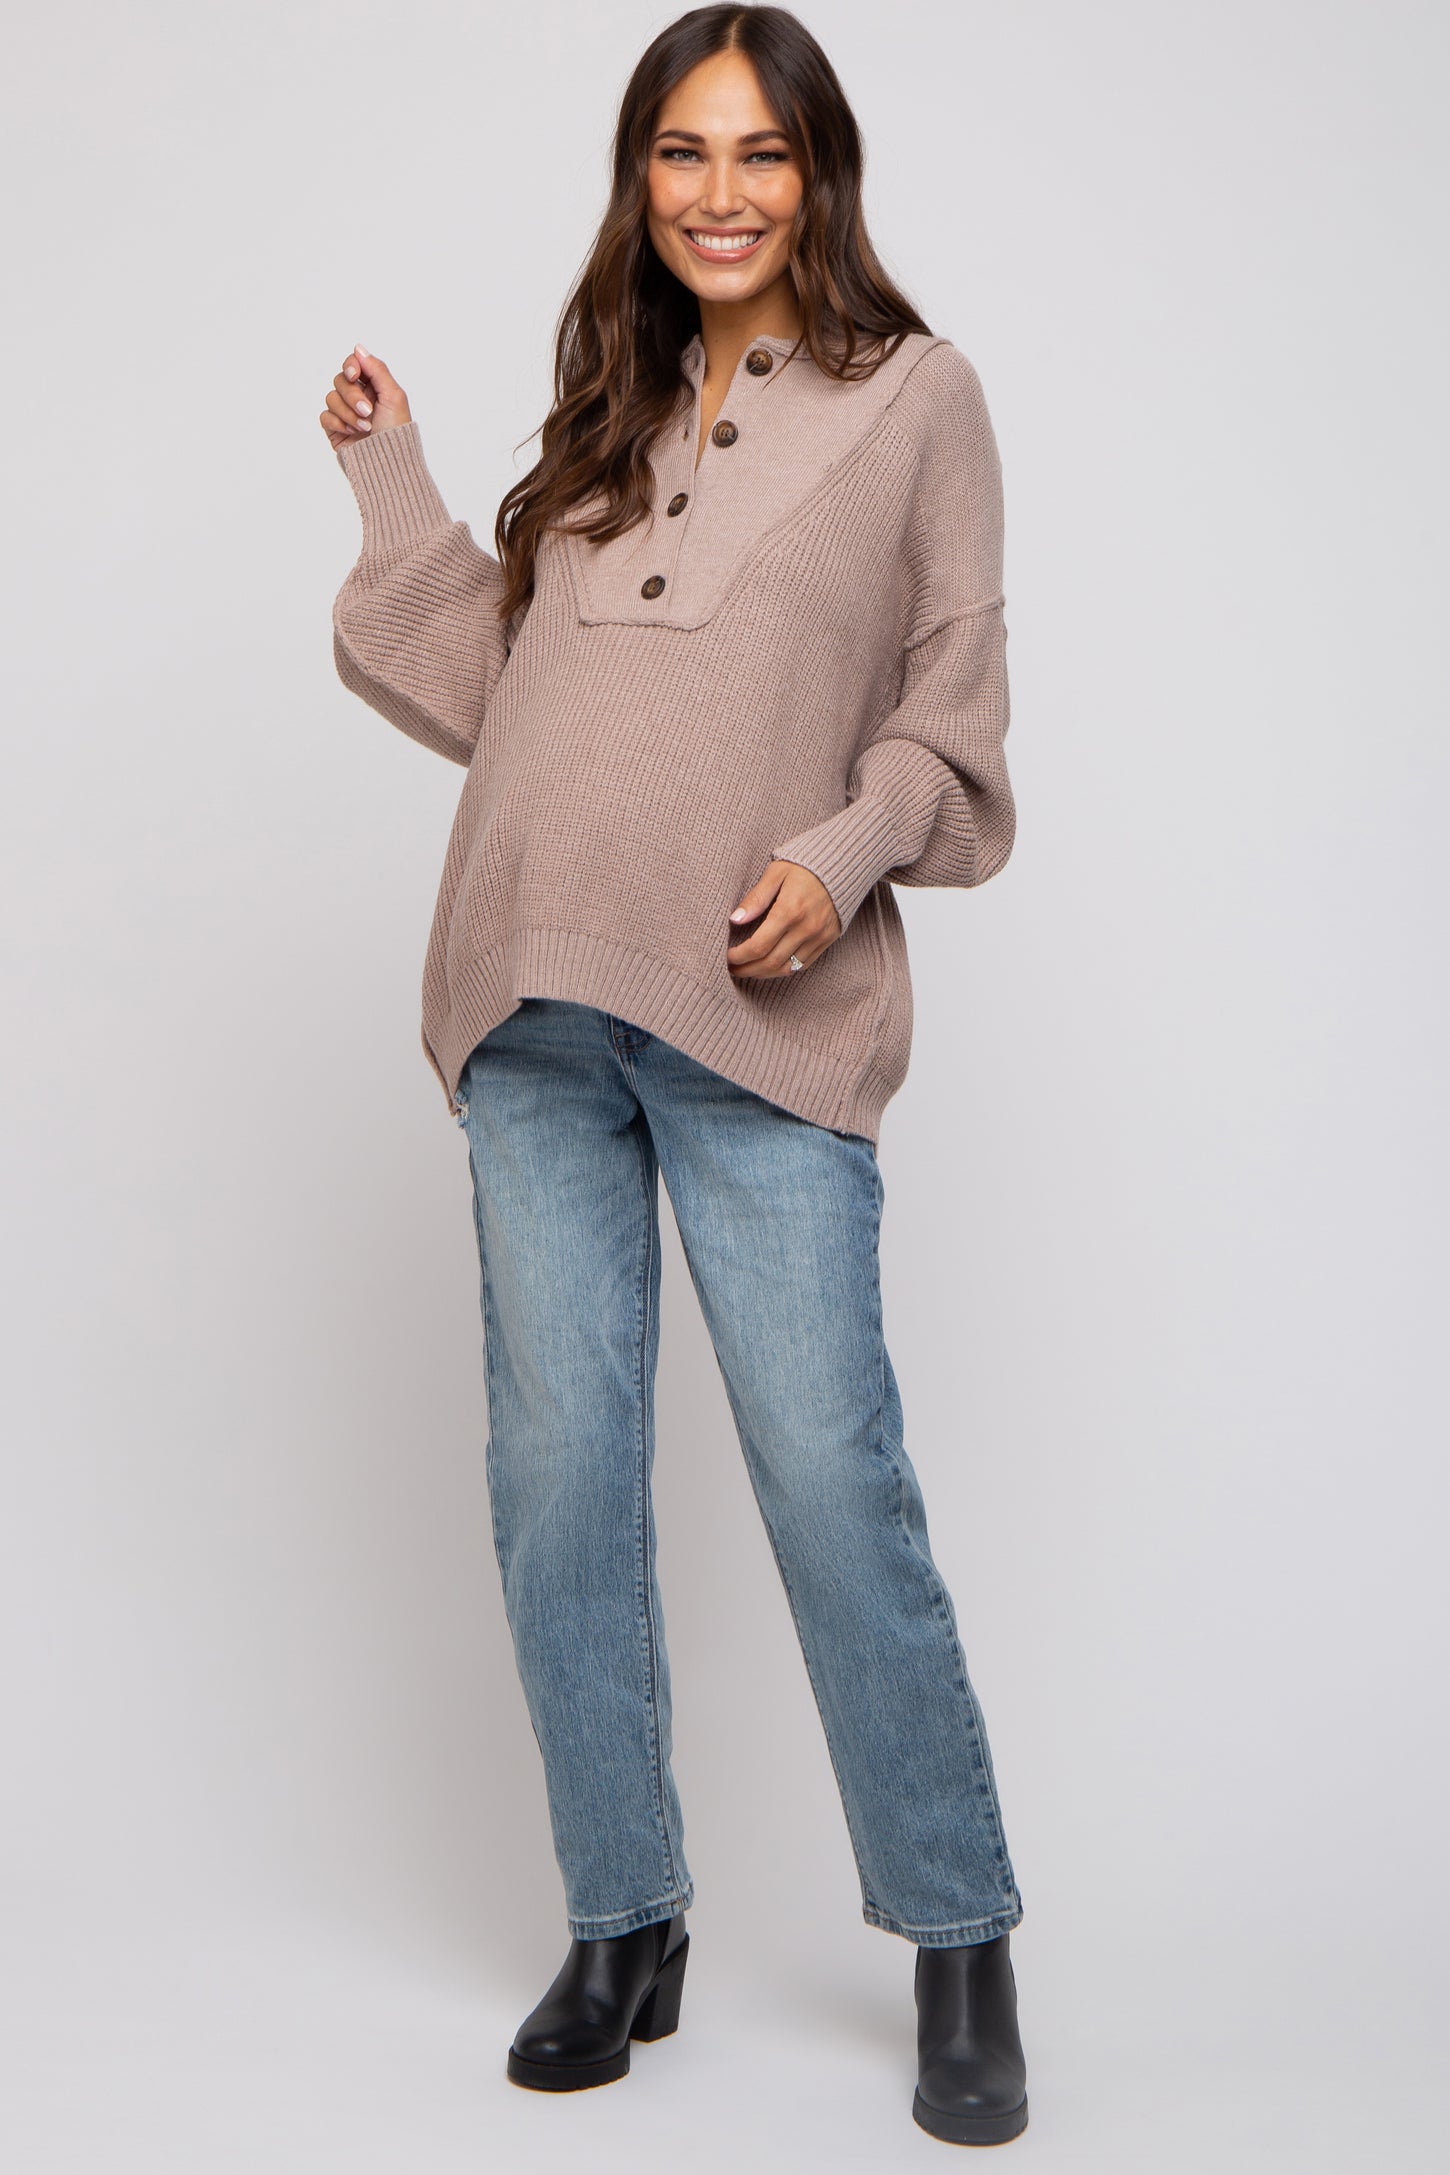 Beige Half Button Up Maternity Sweater